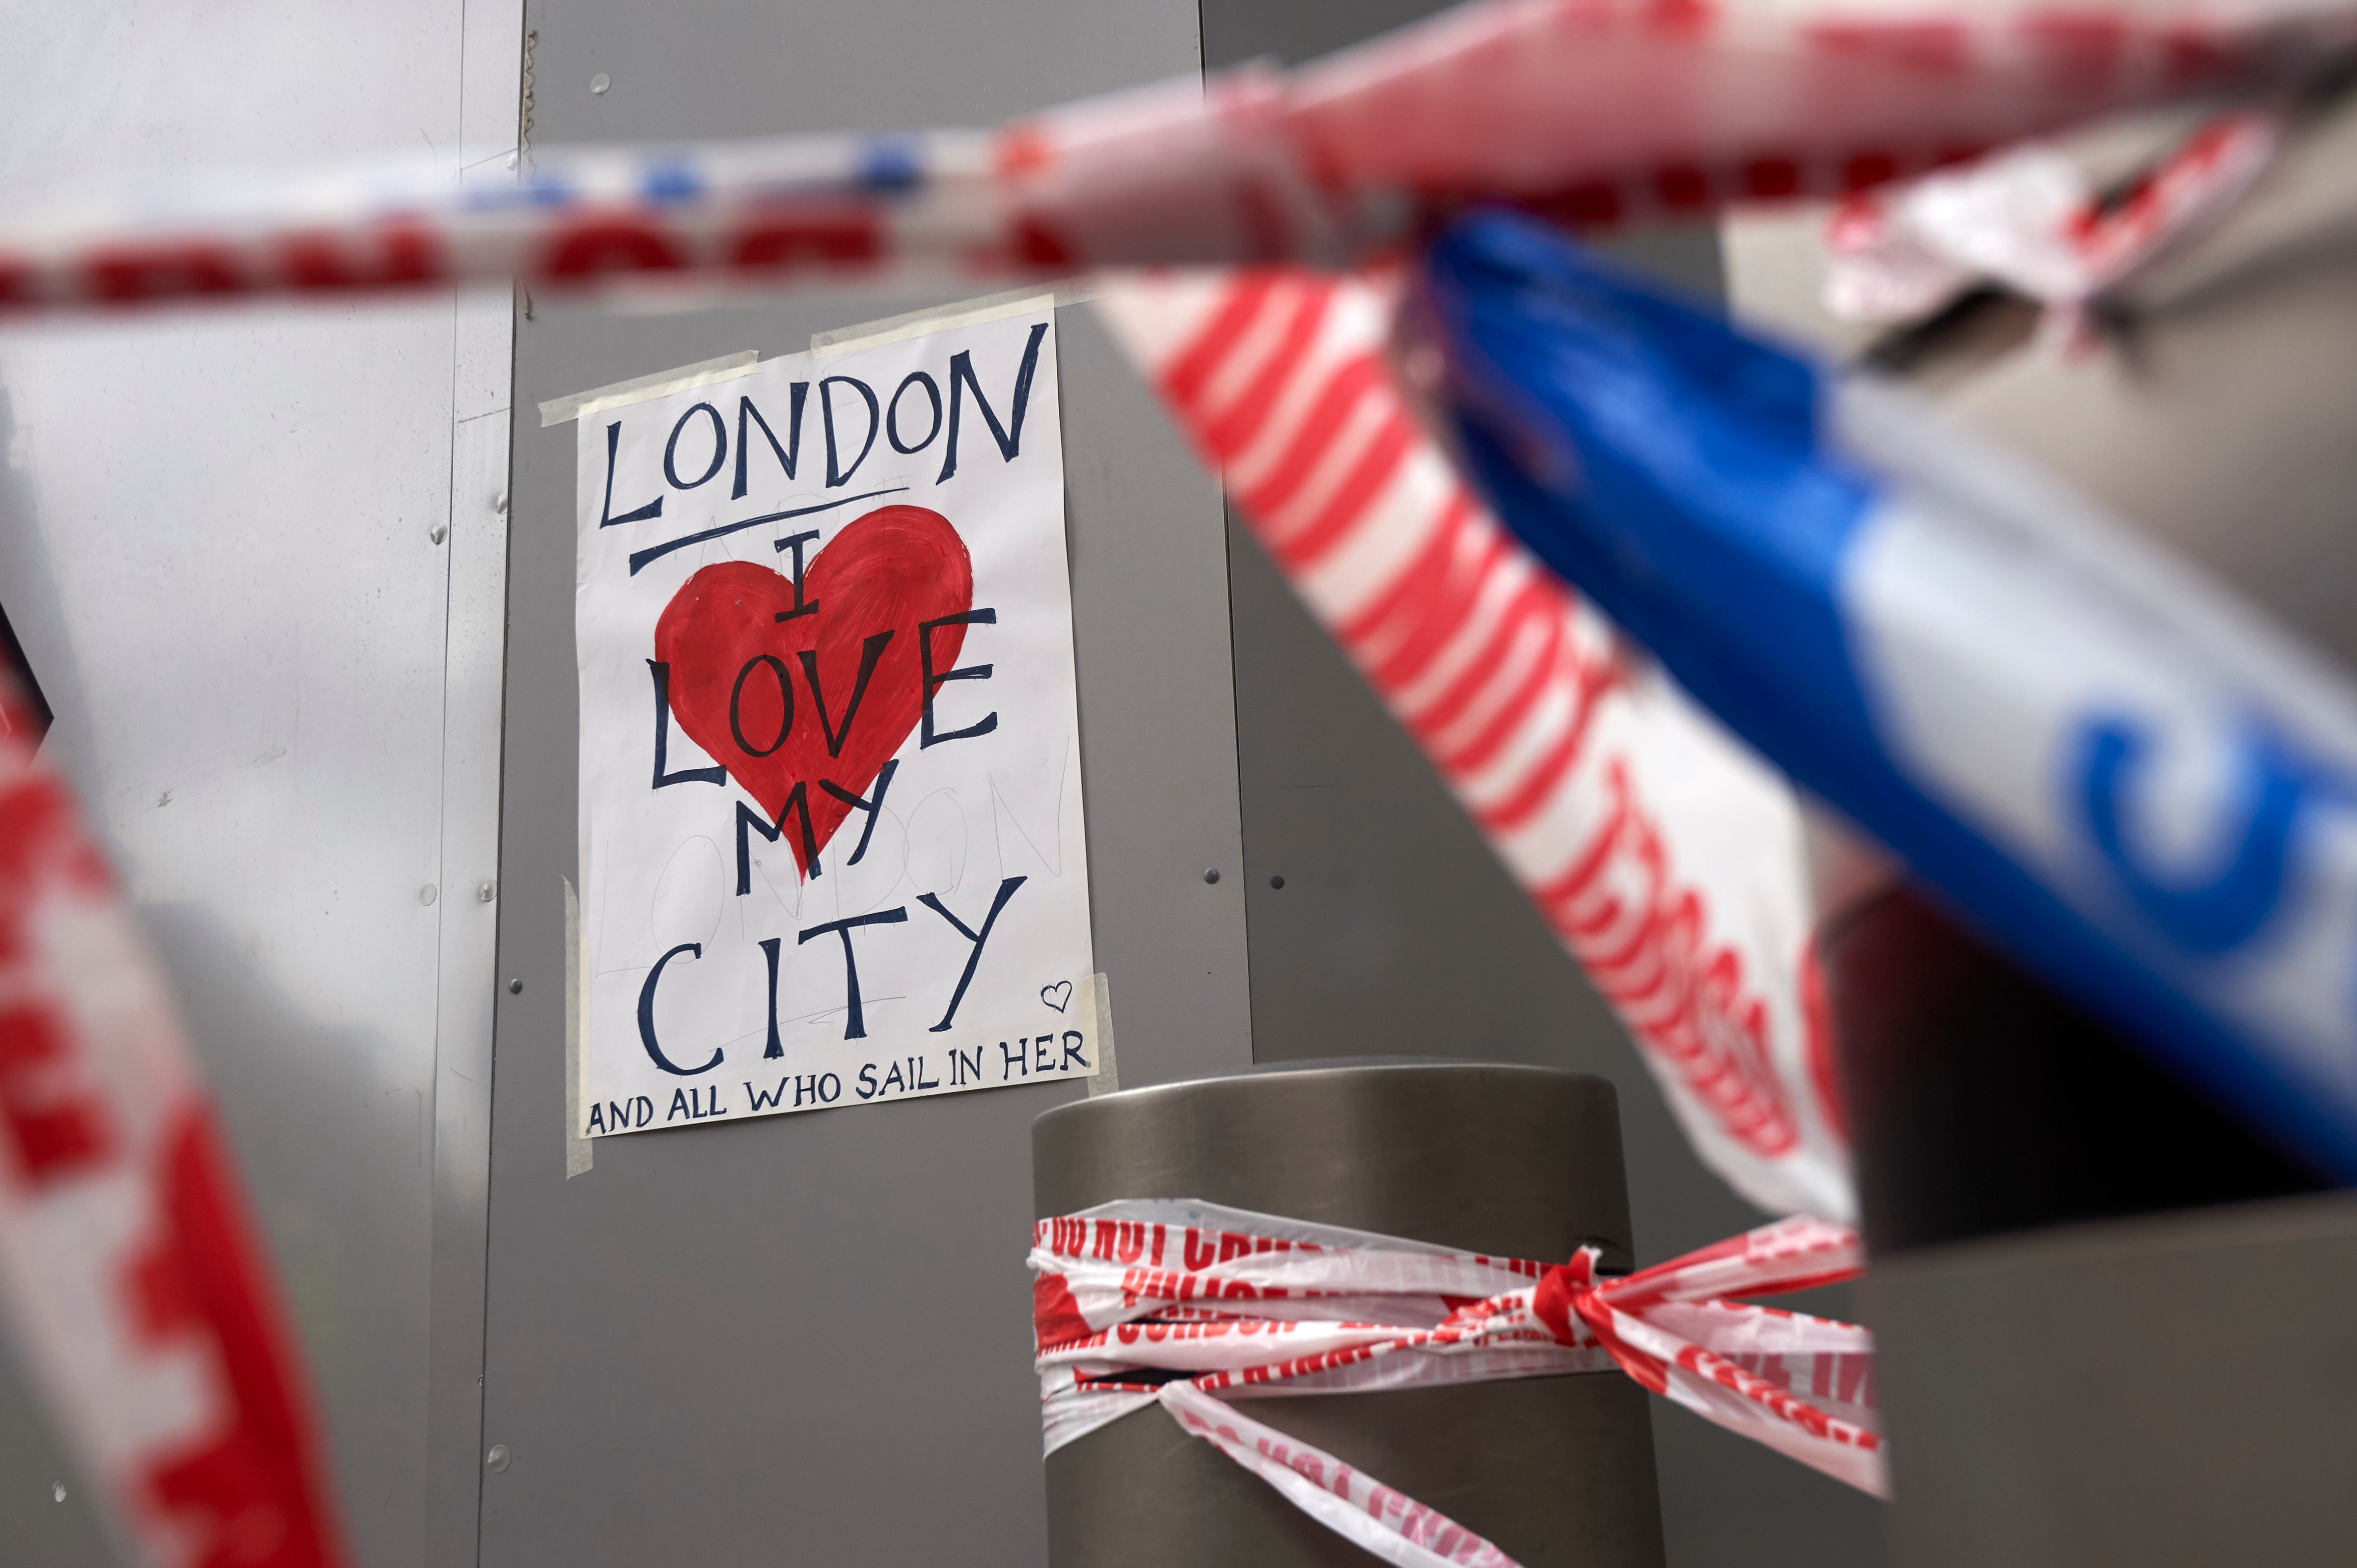 A poster in solidarity is seen on a hoarding outside London Bridge railway station in London on June 5, 2017 at the cordon near the police scene of the June 3 terror attack on London Bridge and the nearby Borough Market.